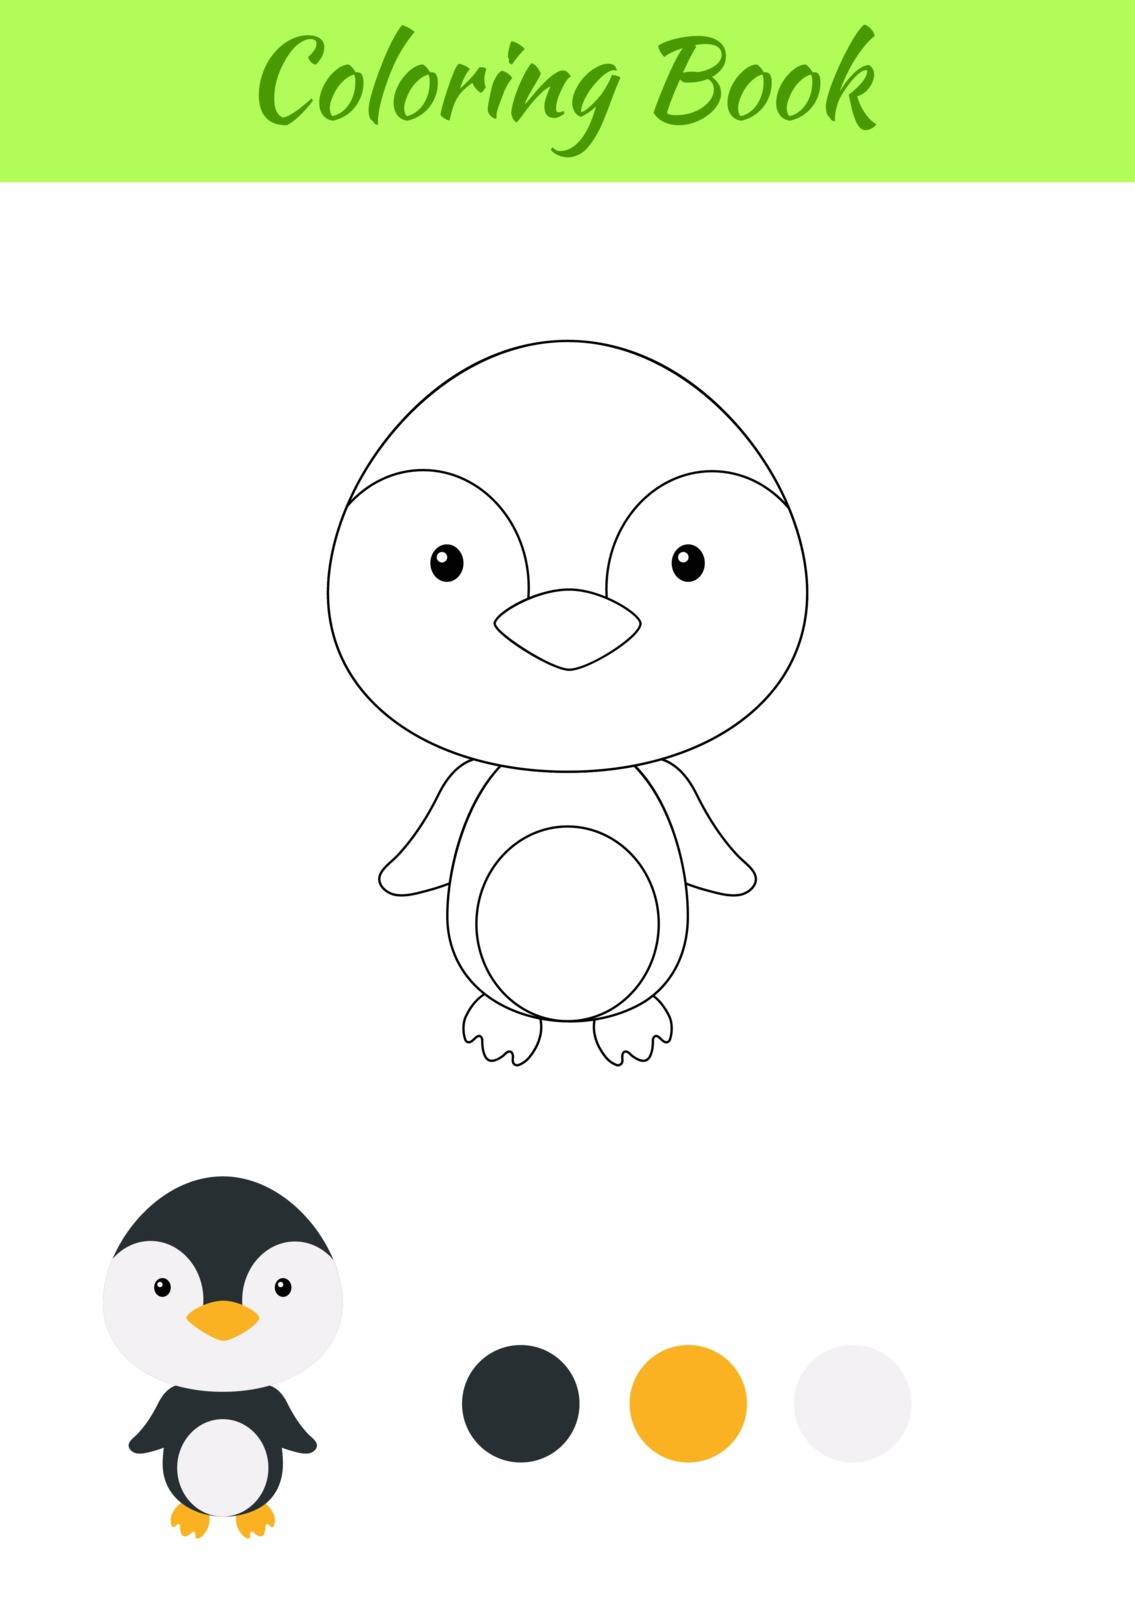 Coloring page happy little baby penguin. Printable coloring book by Melnyk